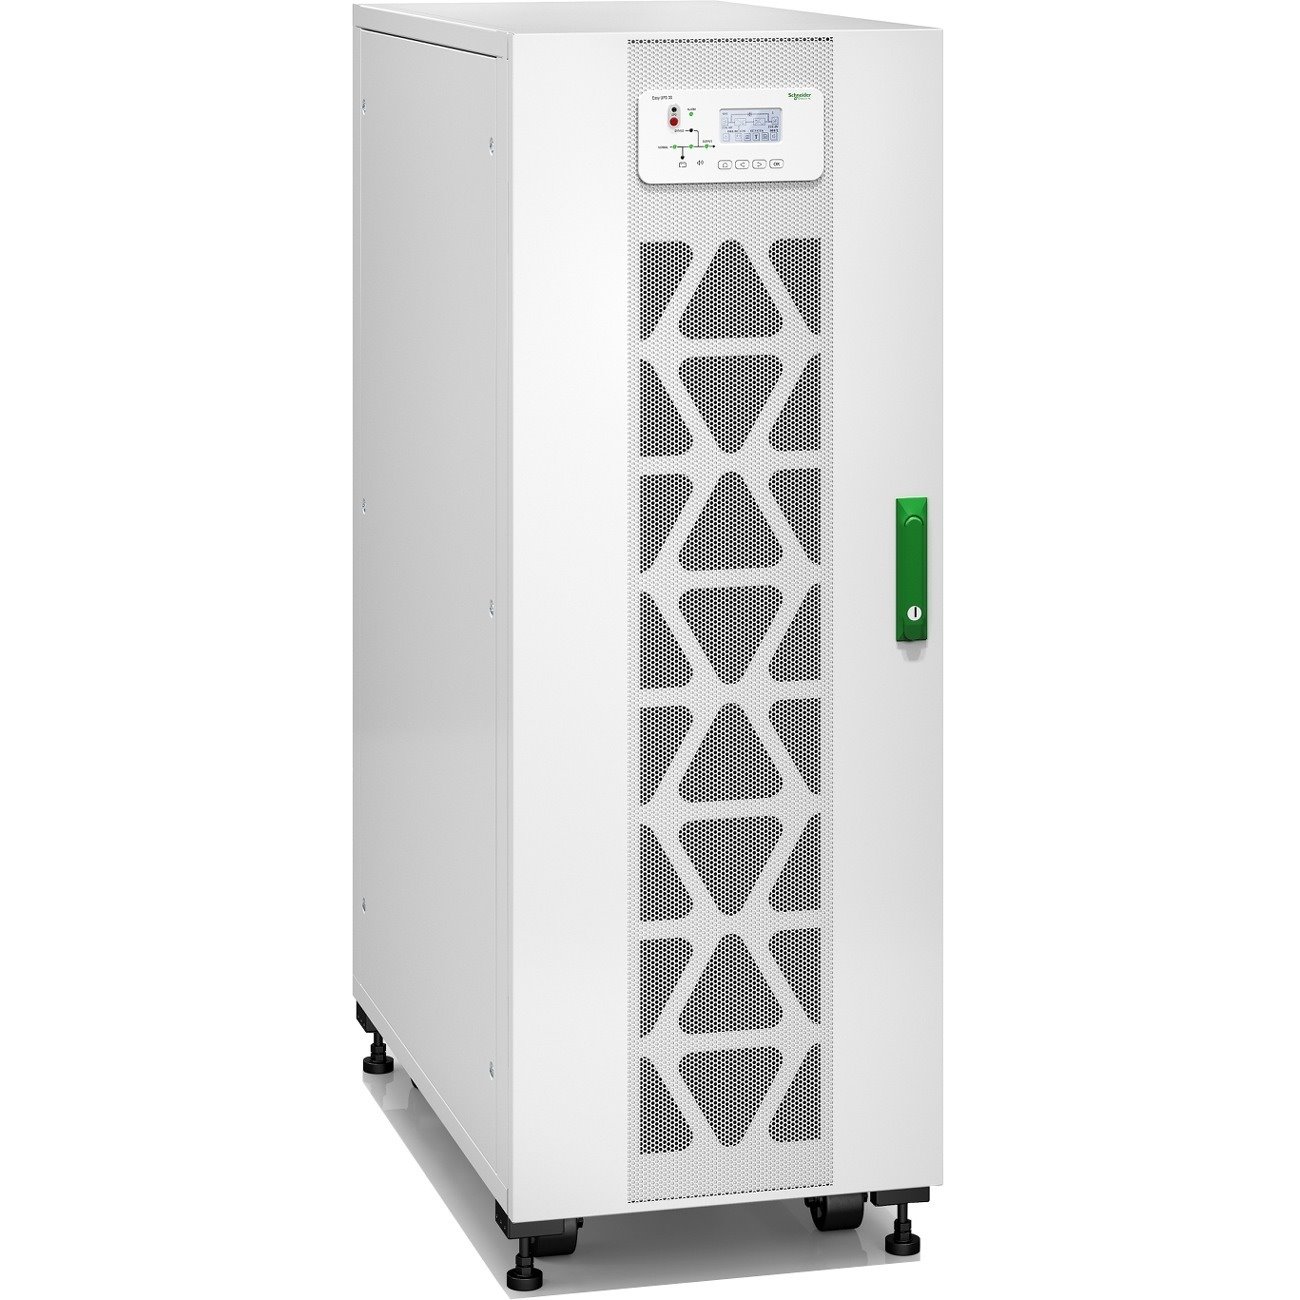 APC by Schneider Electric Easy UPS 3S E3SUPS30K3IB1 Double Conversion Online UPS - 30 kVA - Three Phase